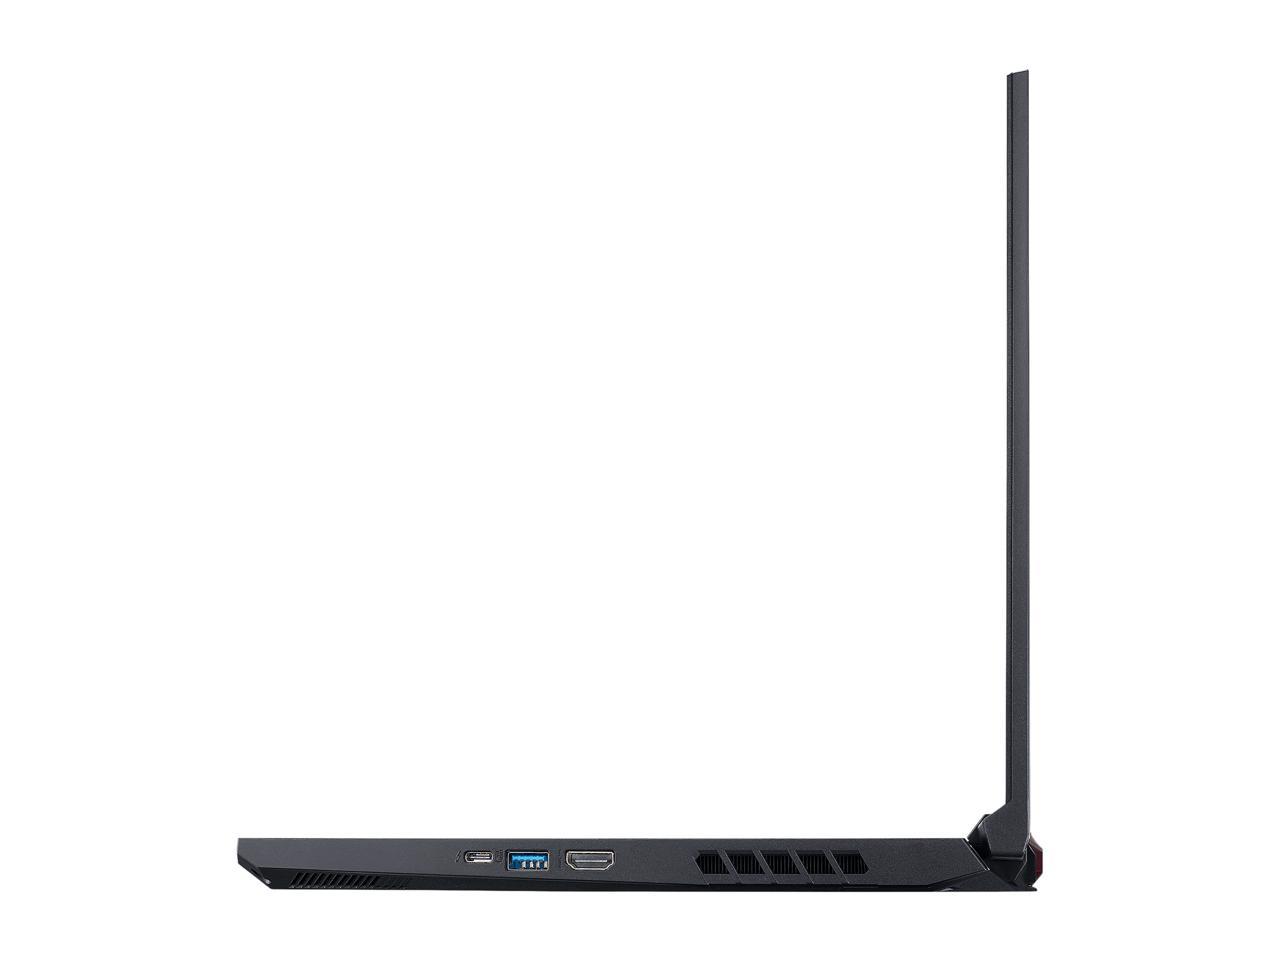 Acer America NB ACER AN515-57-59F7 NH.QEMAA.005 R